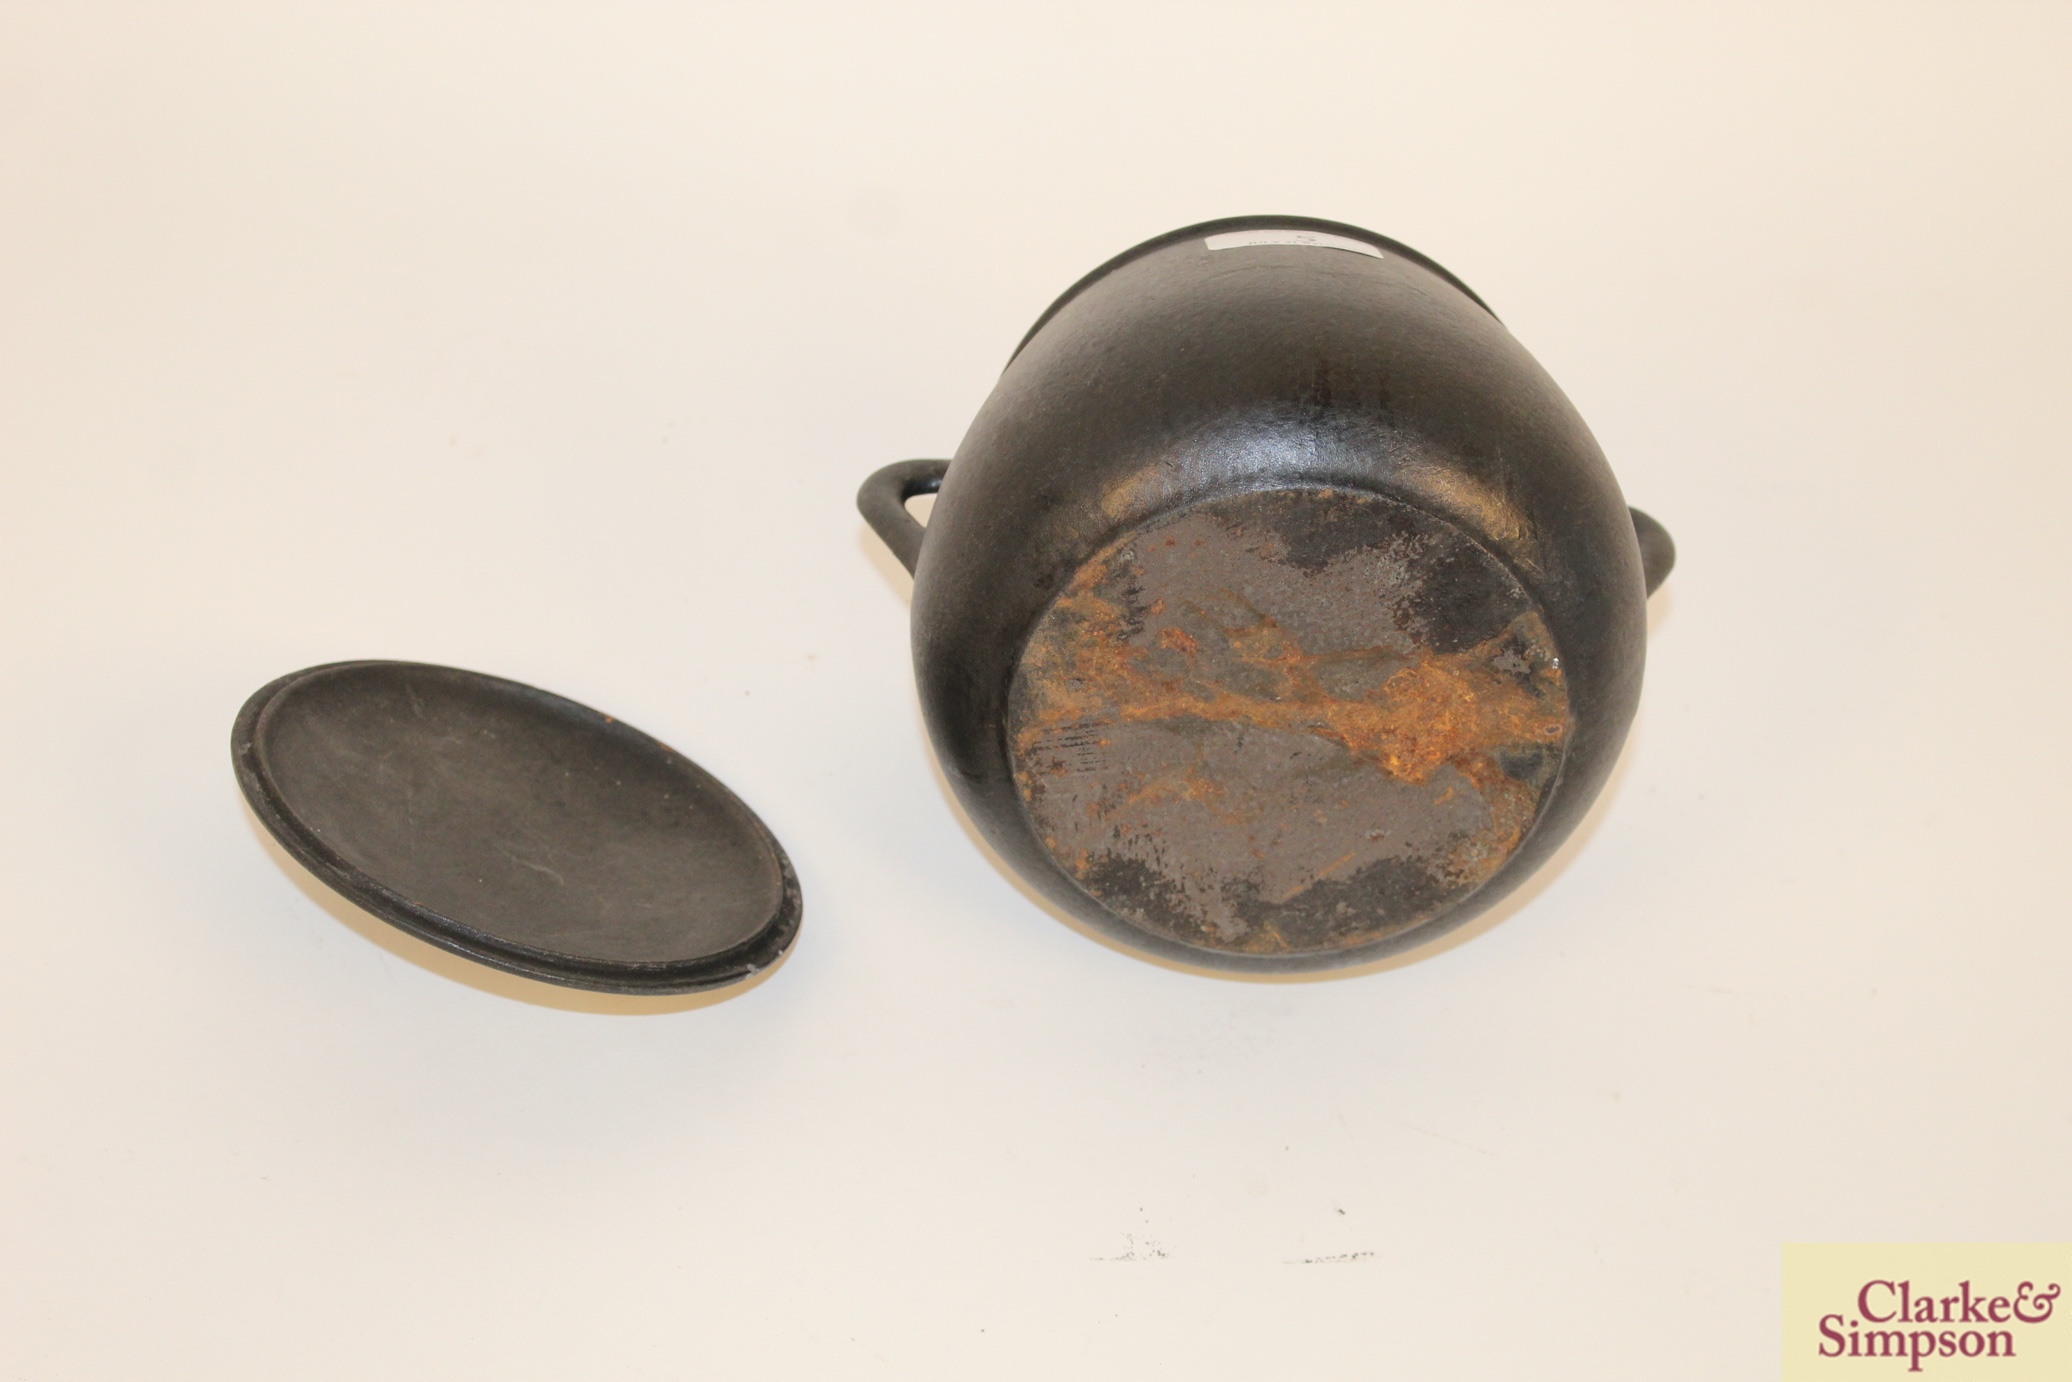 An oval cast iron cauldron / cooking pot by Pugh & - Image 8 of 8